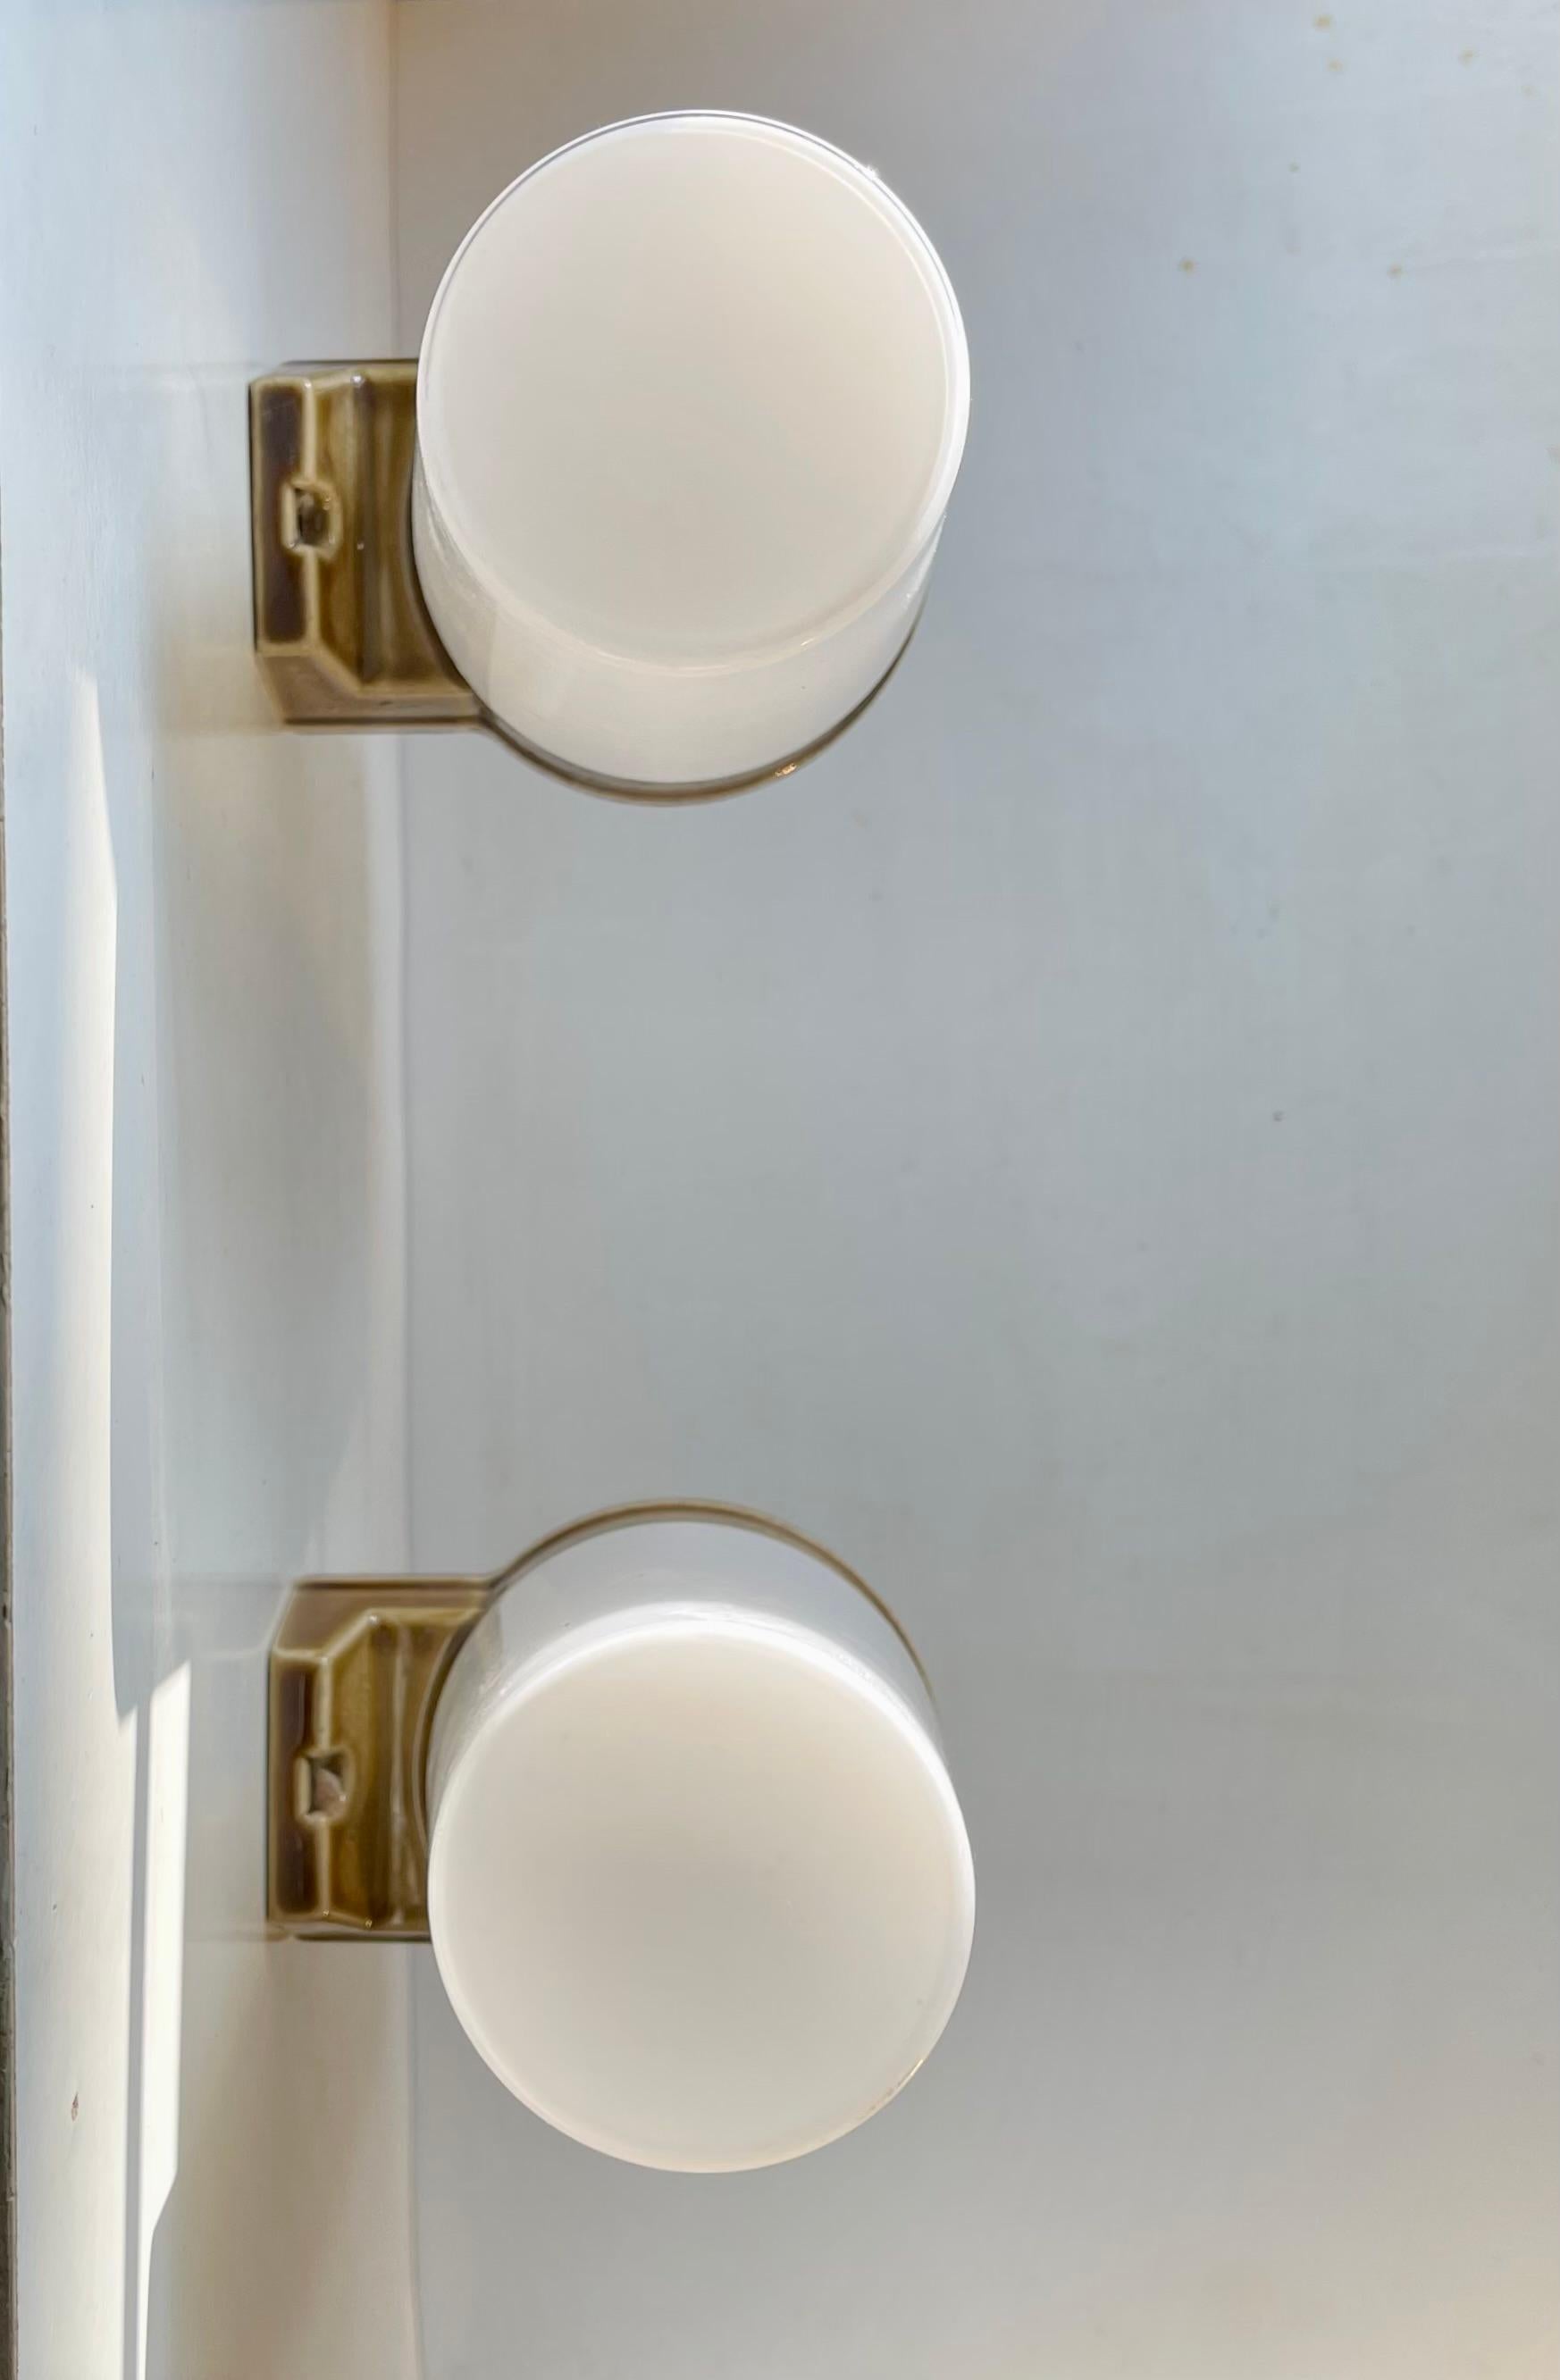 A pair of sconces suitable as bathroom or Toilette lighting. They were designed by Prince Sigvard Bernadotte for the swedish company Ifö during the 1960s. These were manufactured in the 1970s. This model 6065 features glazed mounts each mounted with